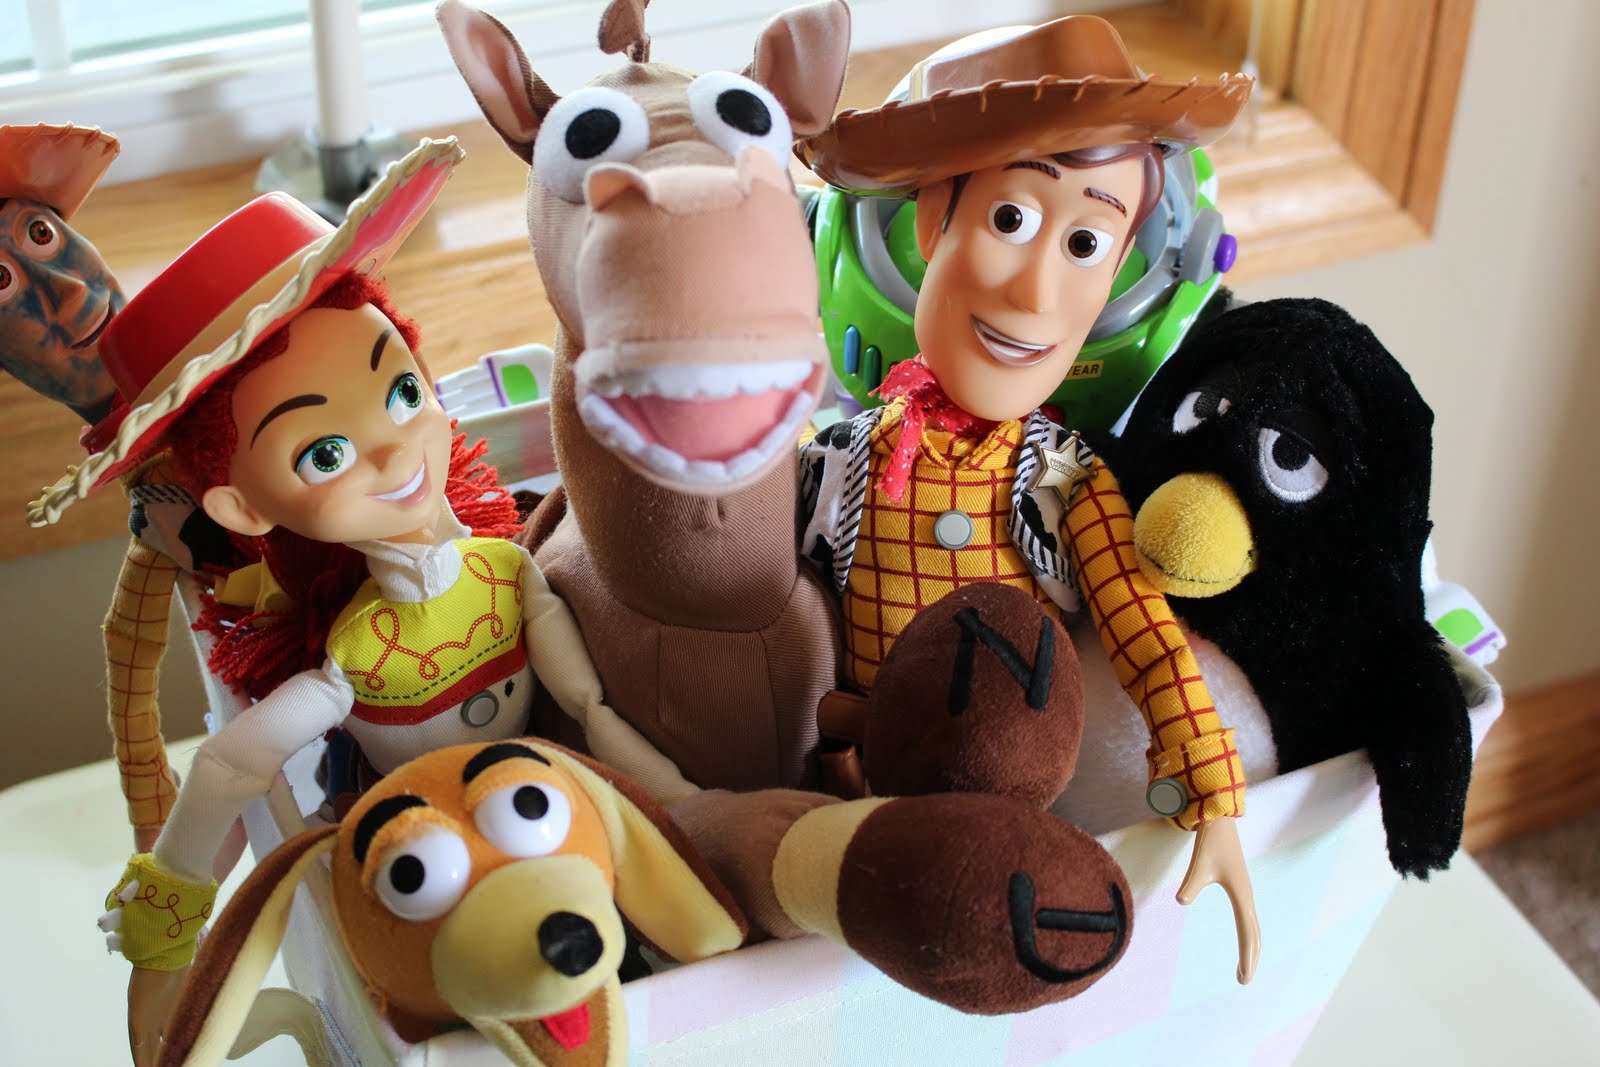 Toys 4 you. Toy story 4 игрушки. Игрушки по мультикам. Мягкие игрушки из мультфильмов. Мягкие игрушки из мультиков.